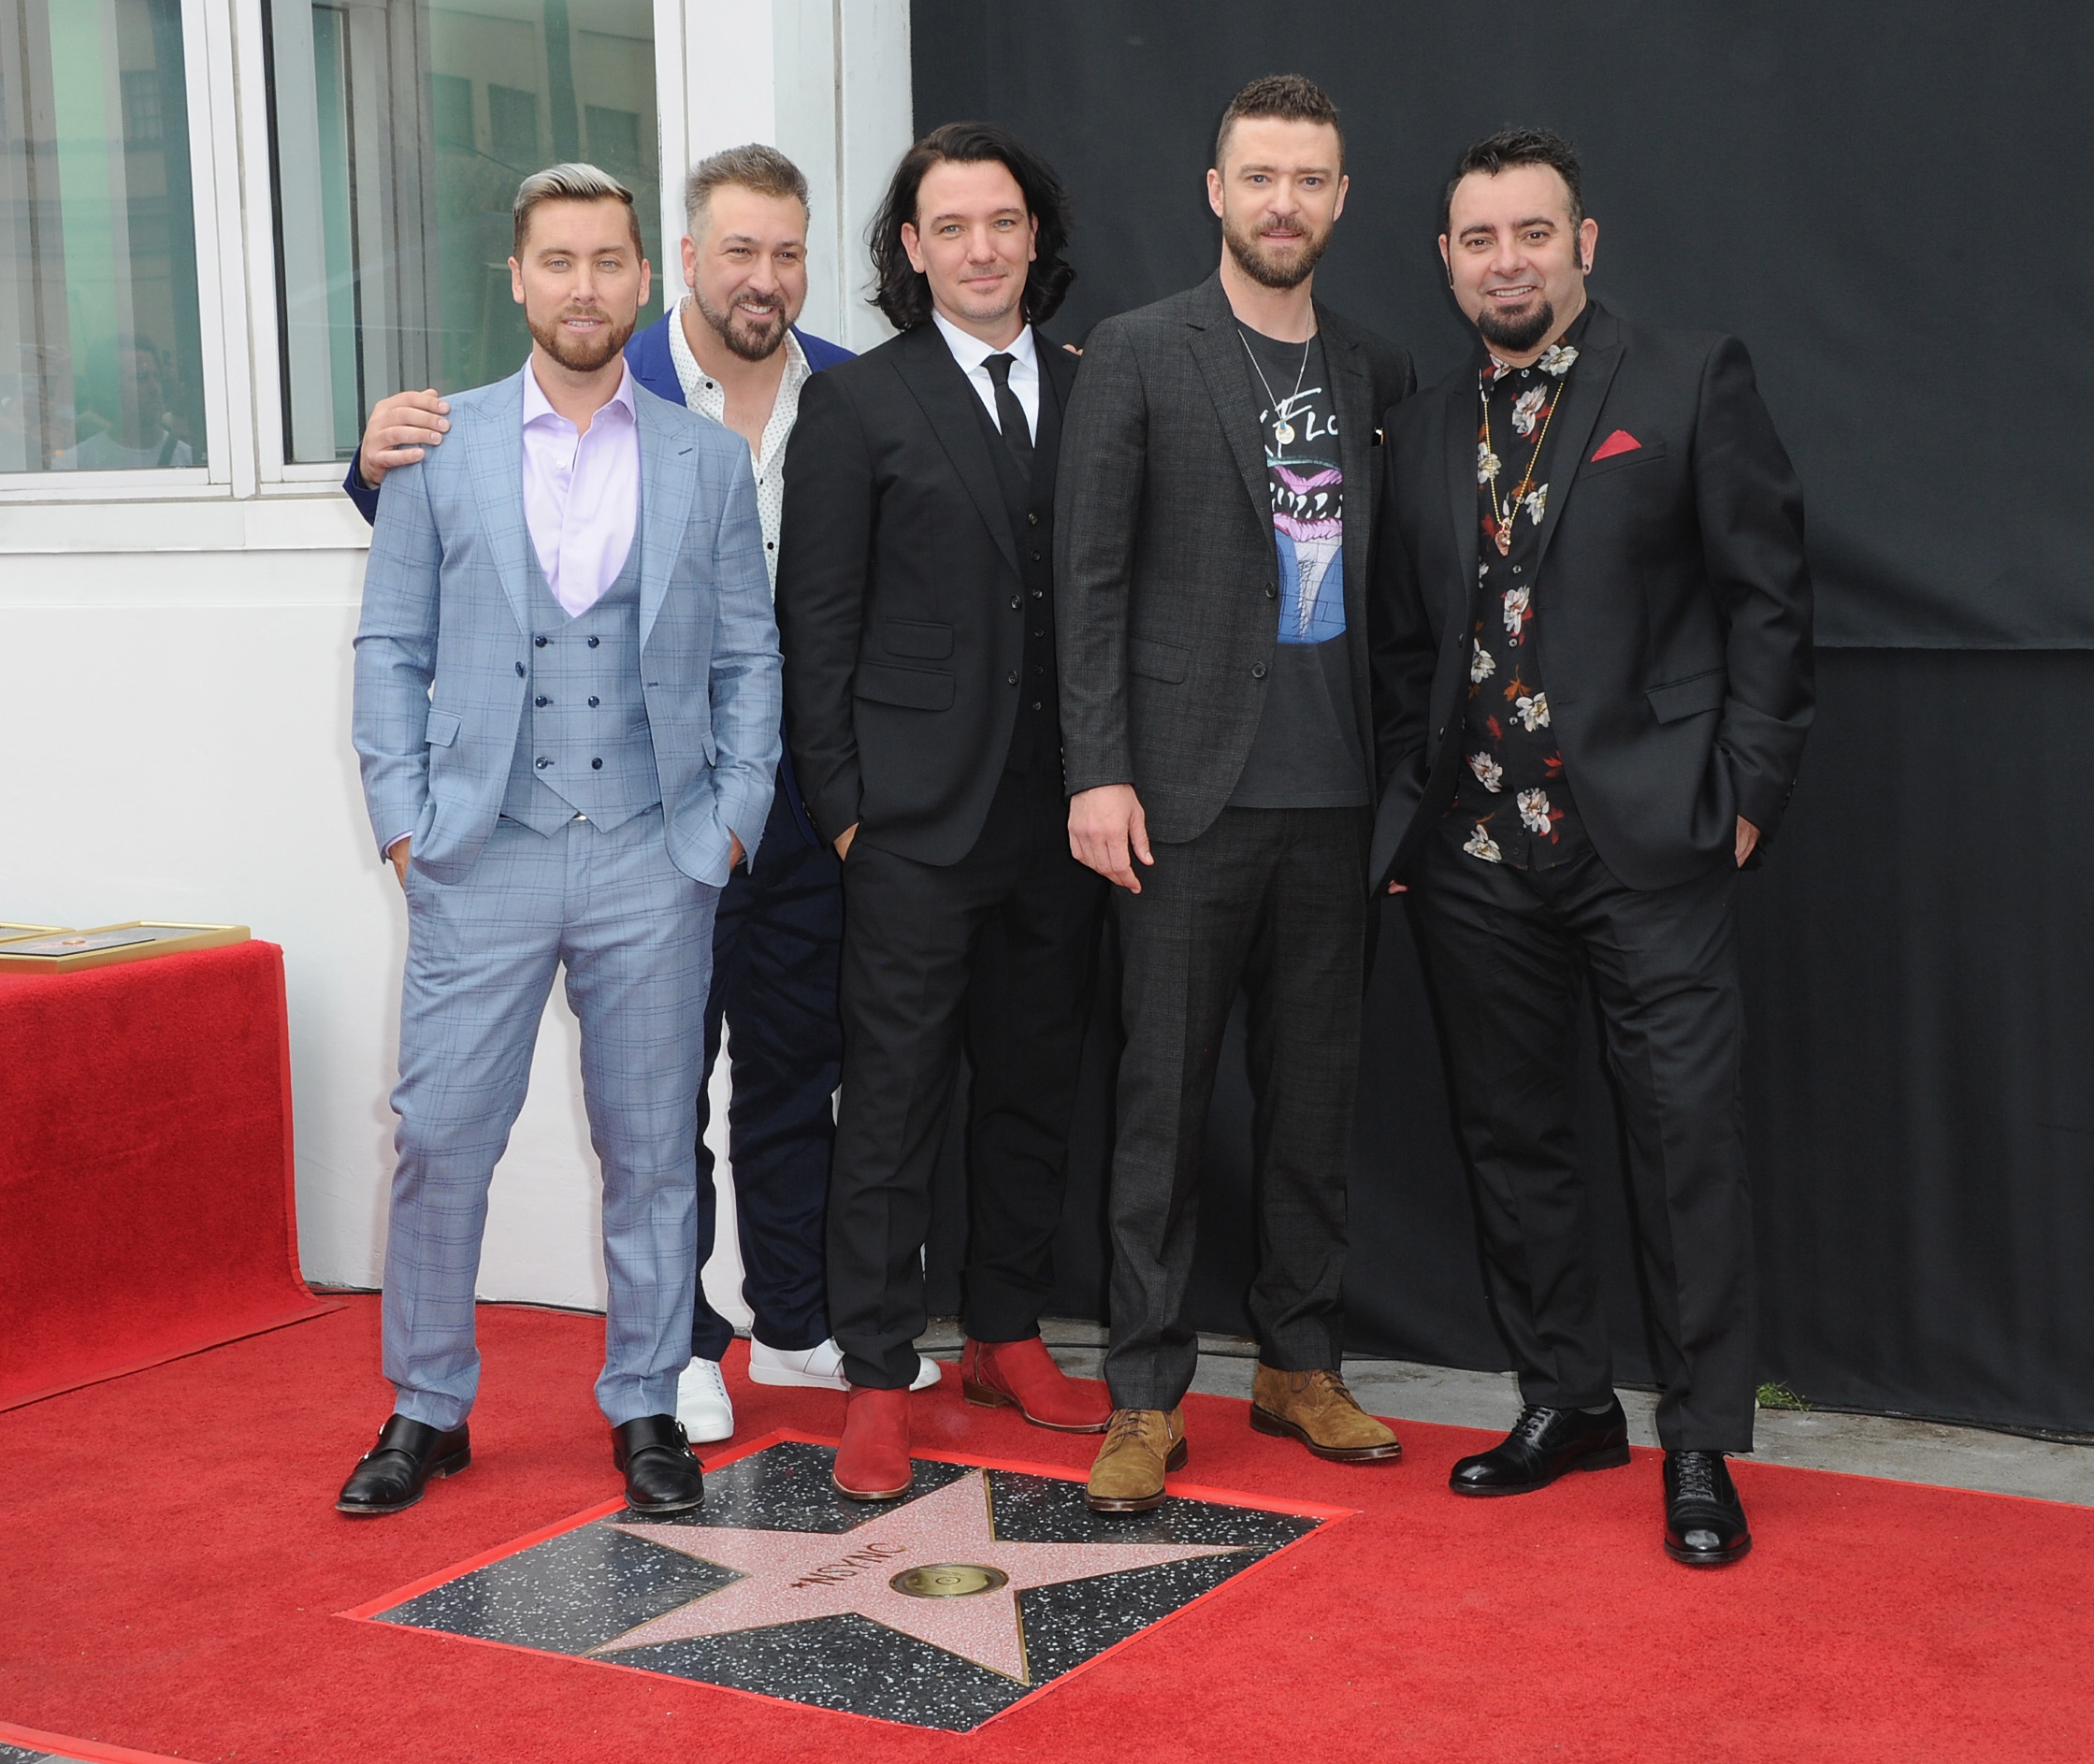 the members of nsync next to their hollywood star